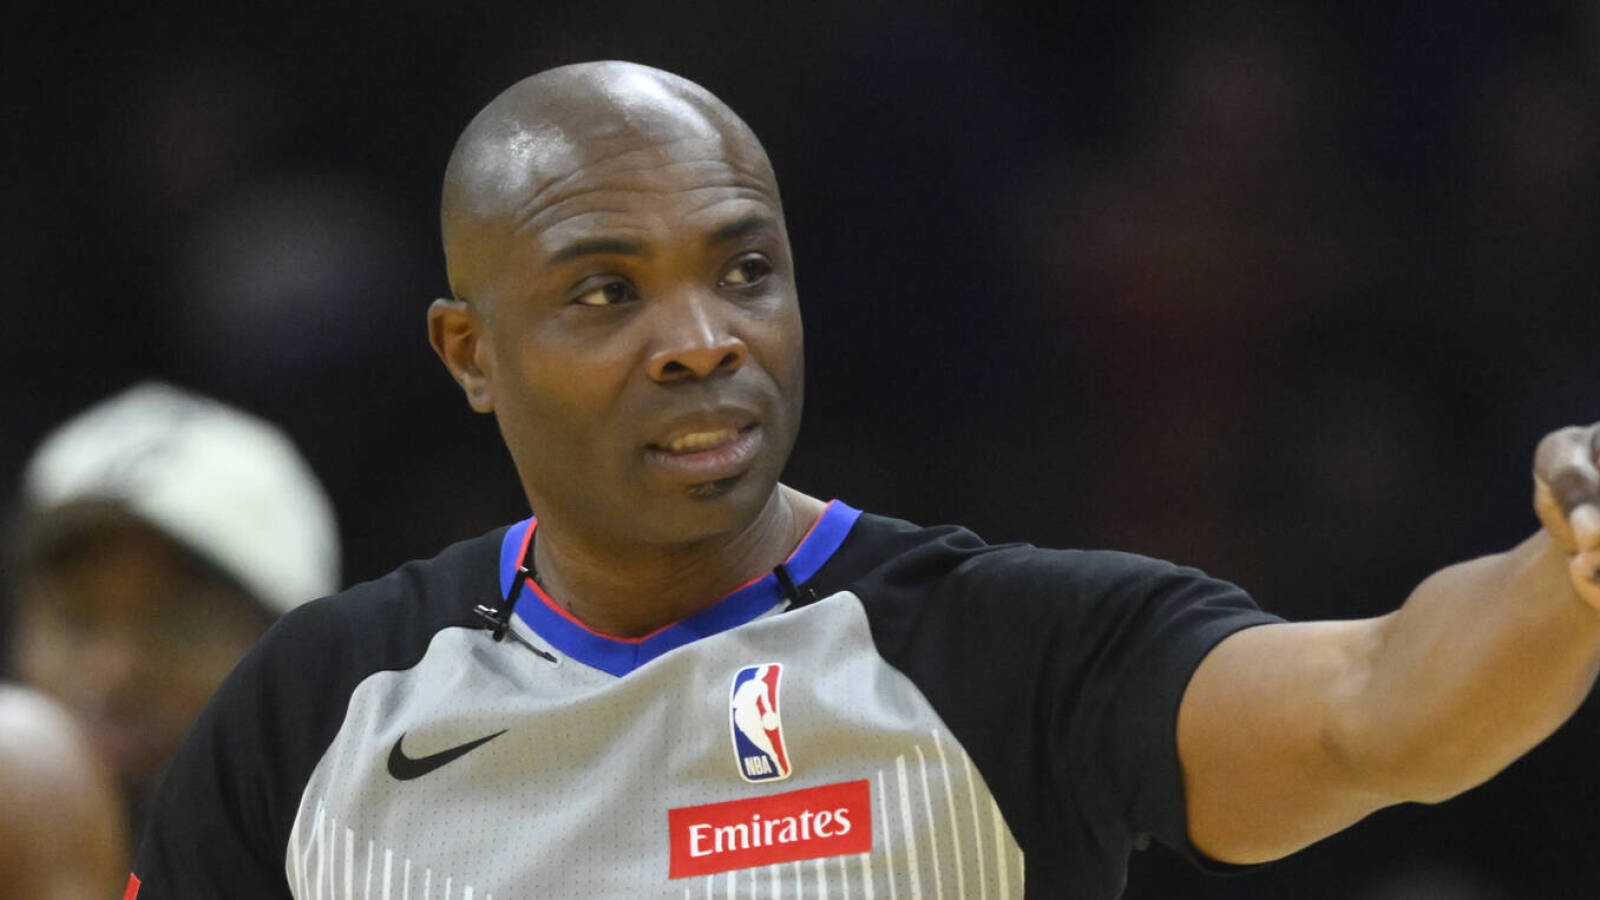 NBA referee returns to Miami two years after making controversial Celtics-Heat call